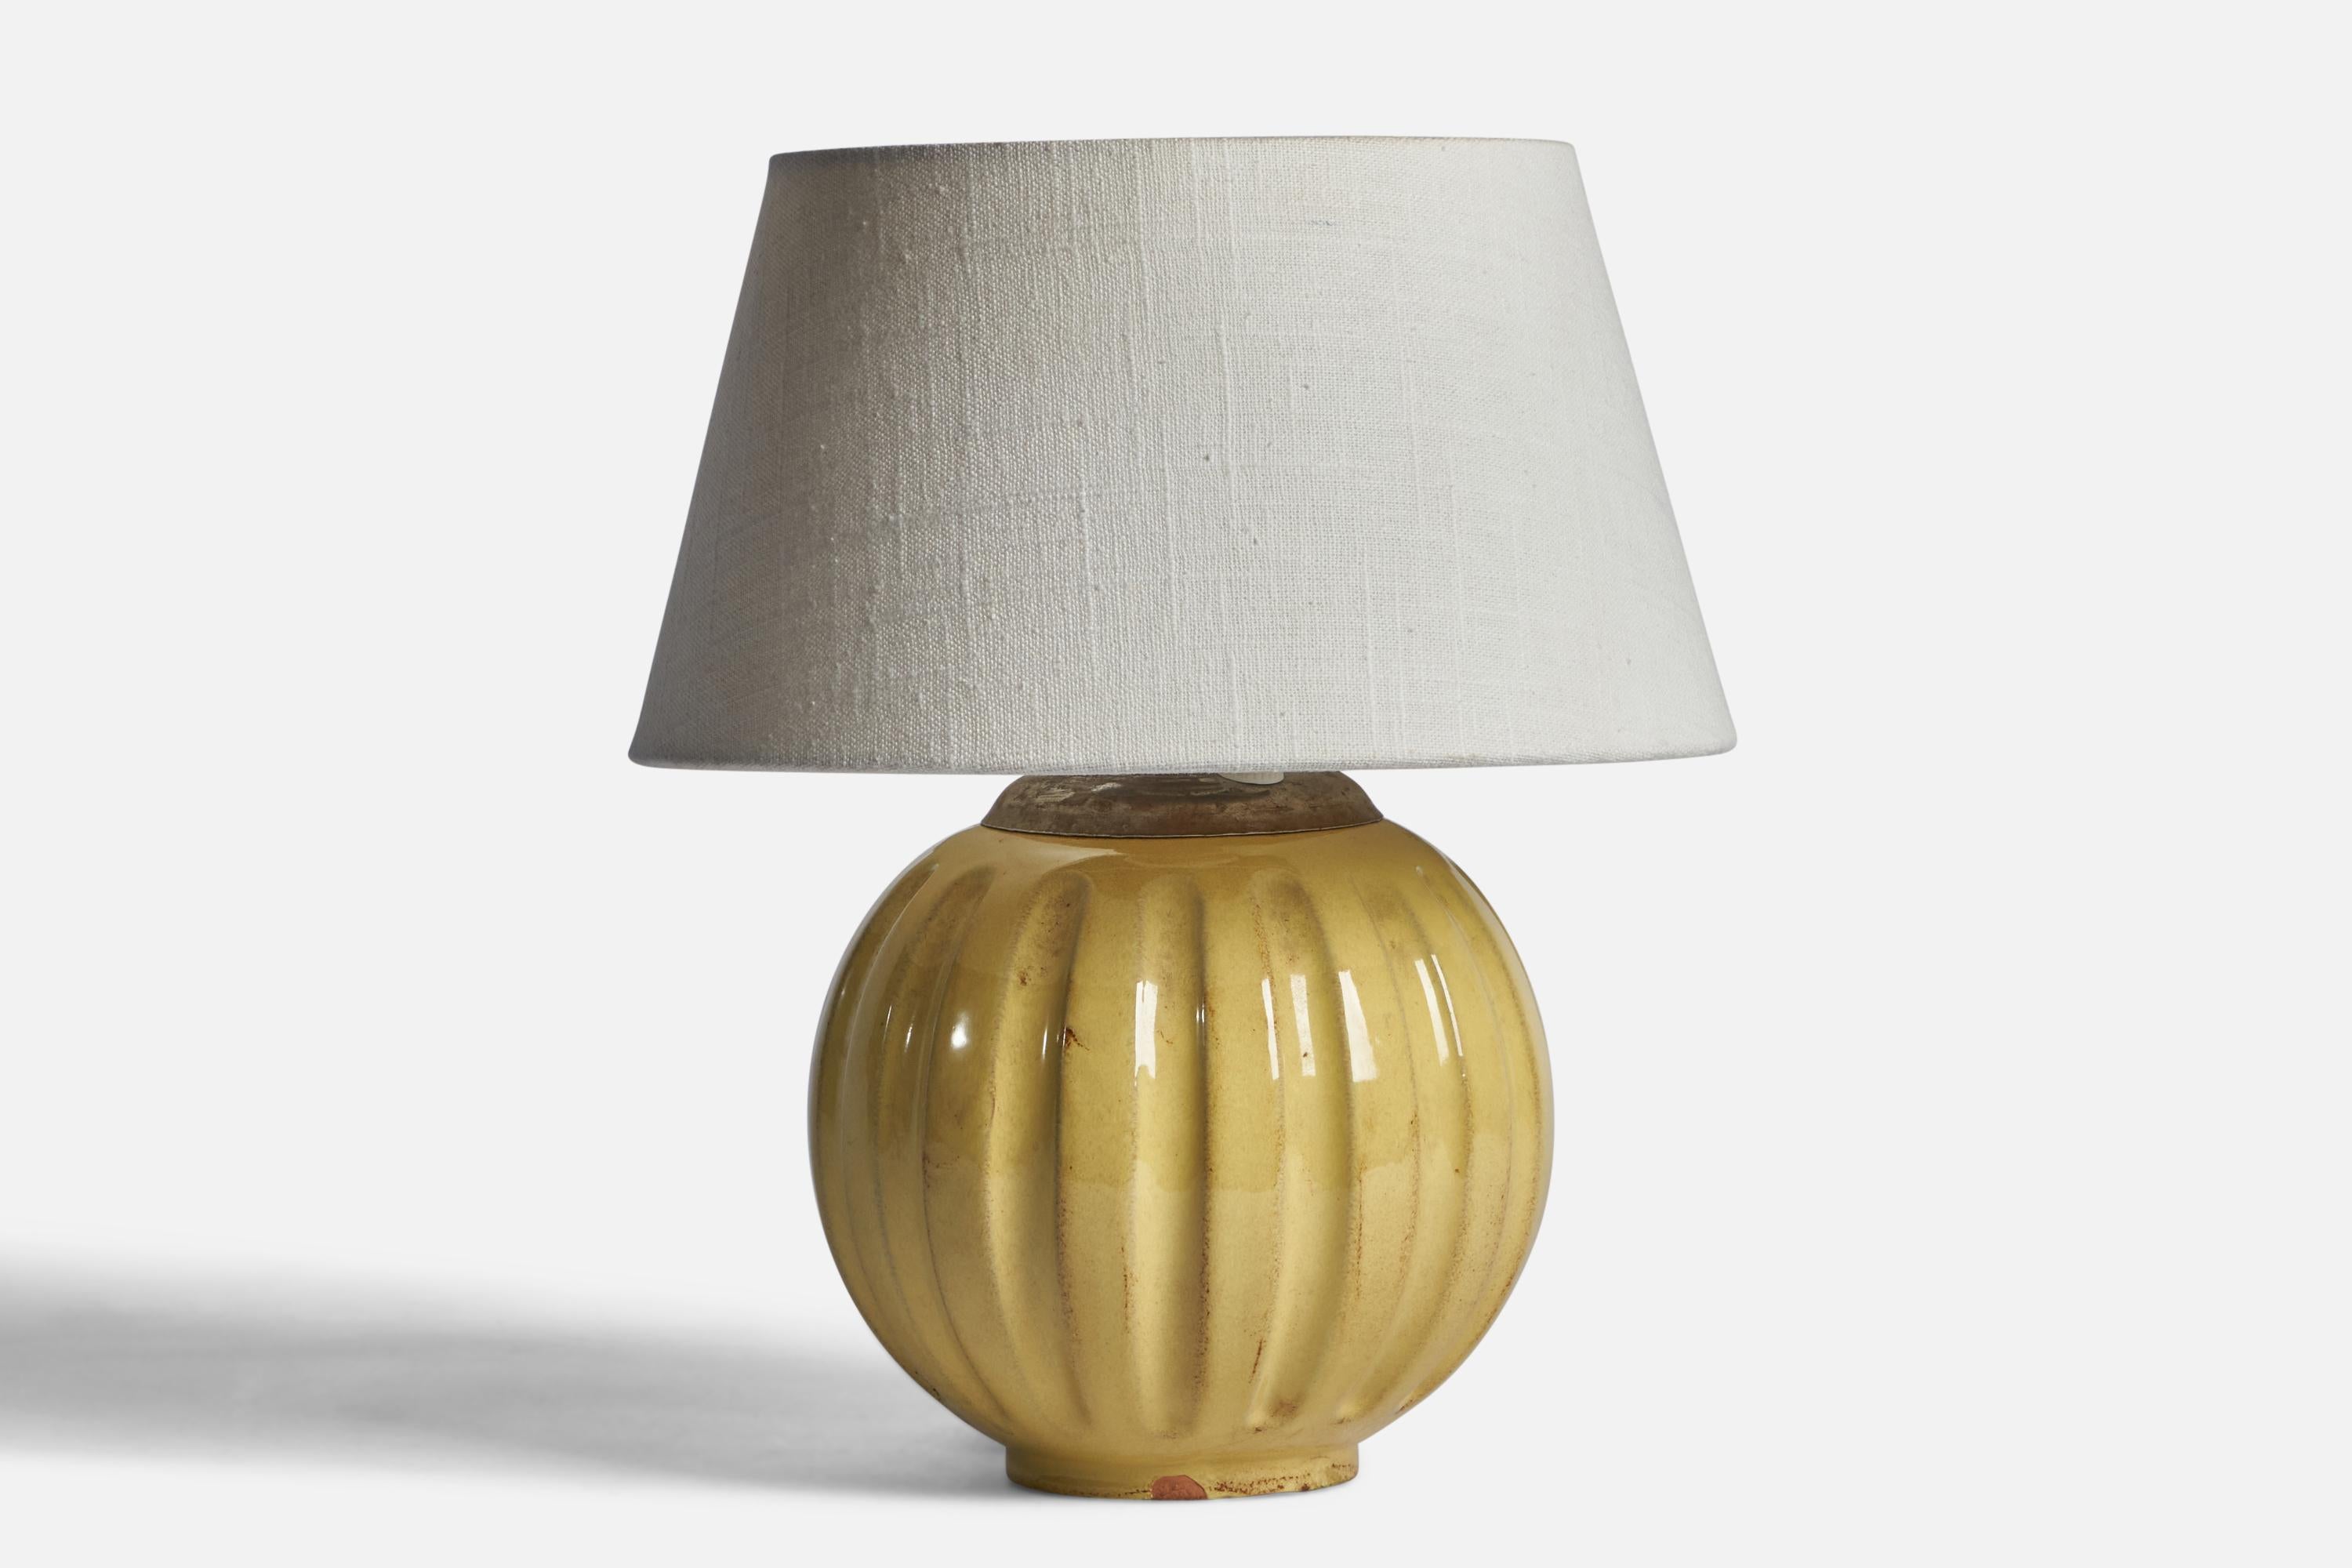 A yellow-glazed fluted earthenware and brass table lamp designed and produced by Upsala Ekeby, Sweden, 1930s.

Dimensions of Lamp (inches): 9.25” H x 7” Diameter
Dimensions of Shade (inches): 7” Top Diameter x 10” Bottom Diameter x 5.5” H